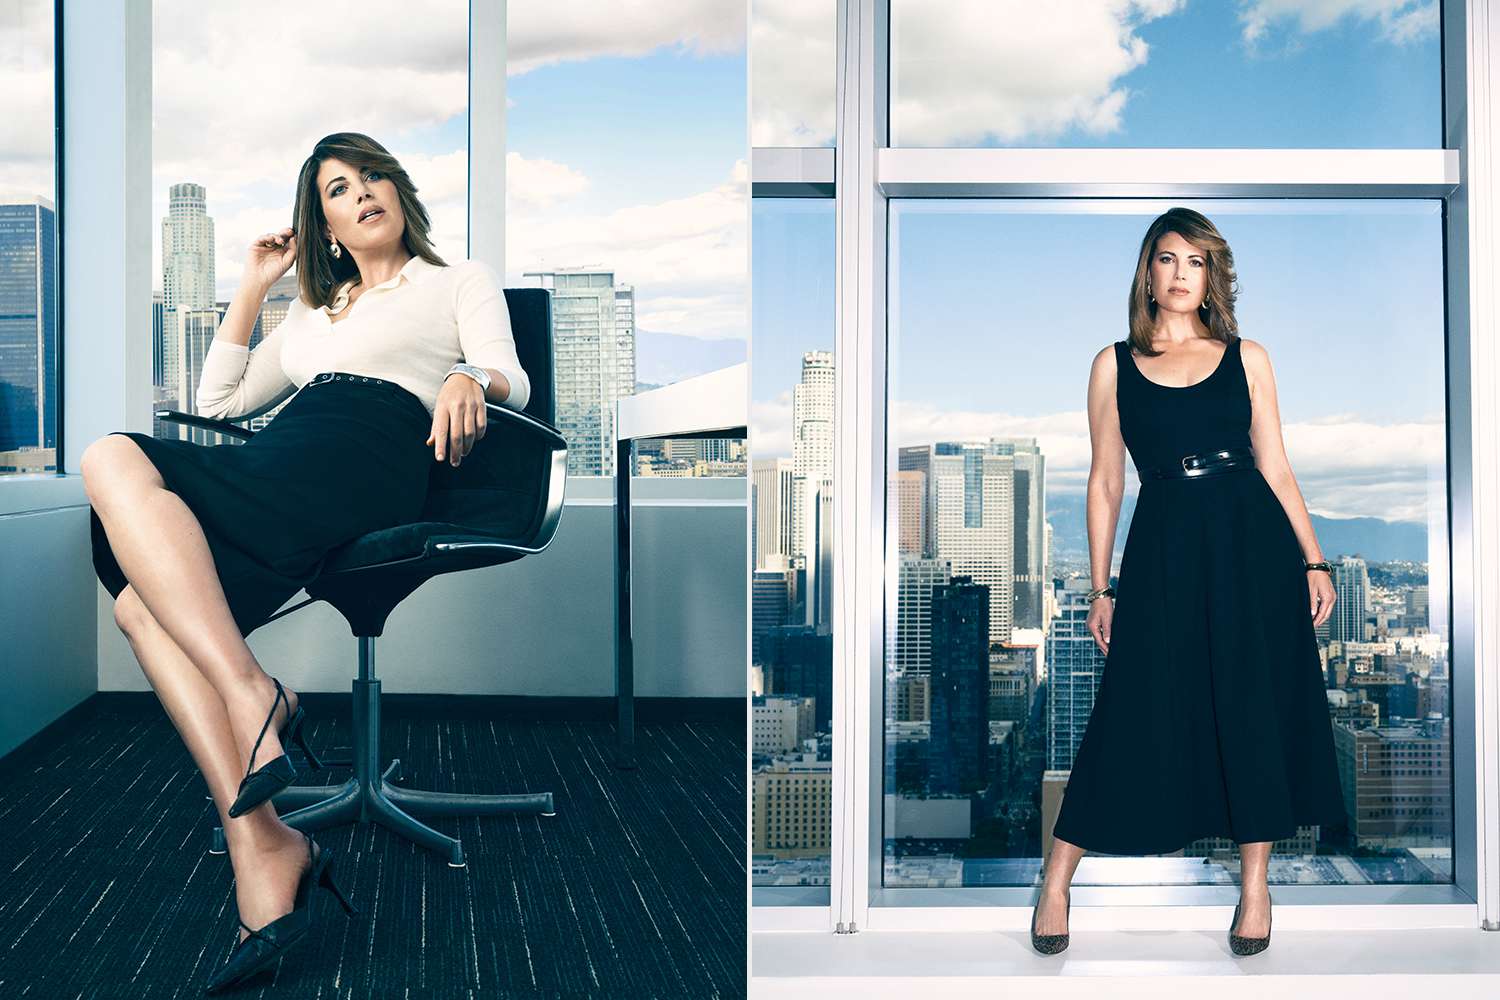 Monica Lewinsky Gets into the Fashion Game at 50 with Reformation Campaign [Video]